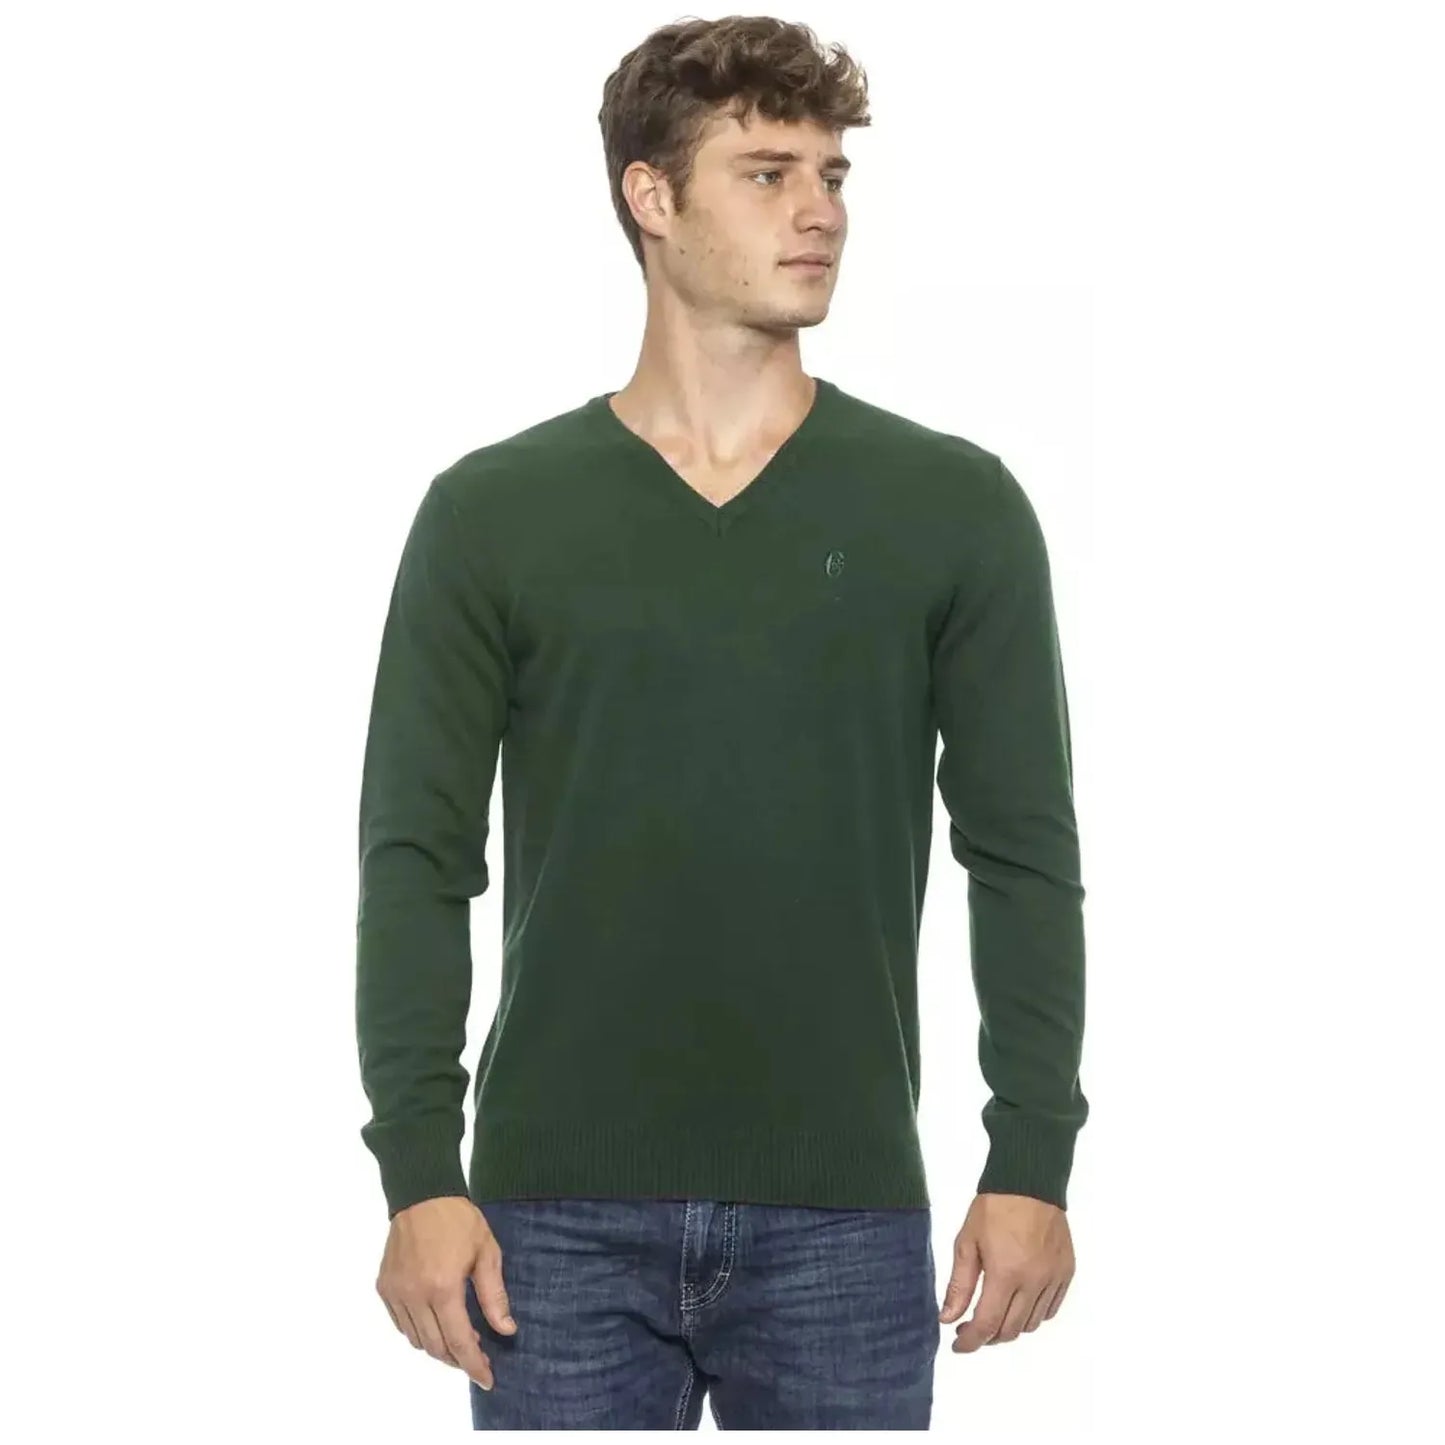 Conte of Florence Elegant Green V-Neck Men's Sweater green-sweater stock_product_image_19451_1489648562-33-53e3c618-aa0.webp